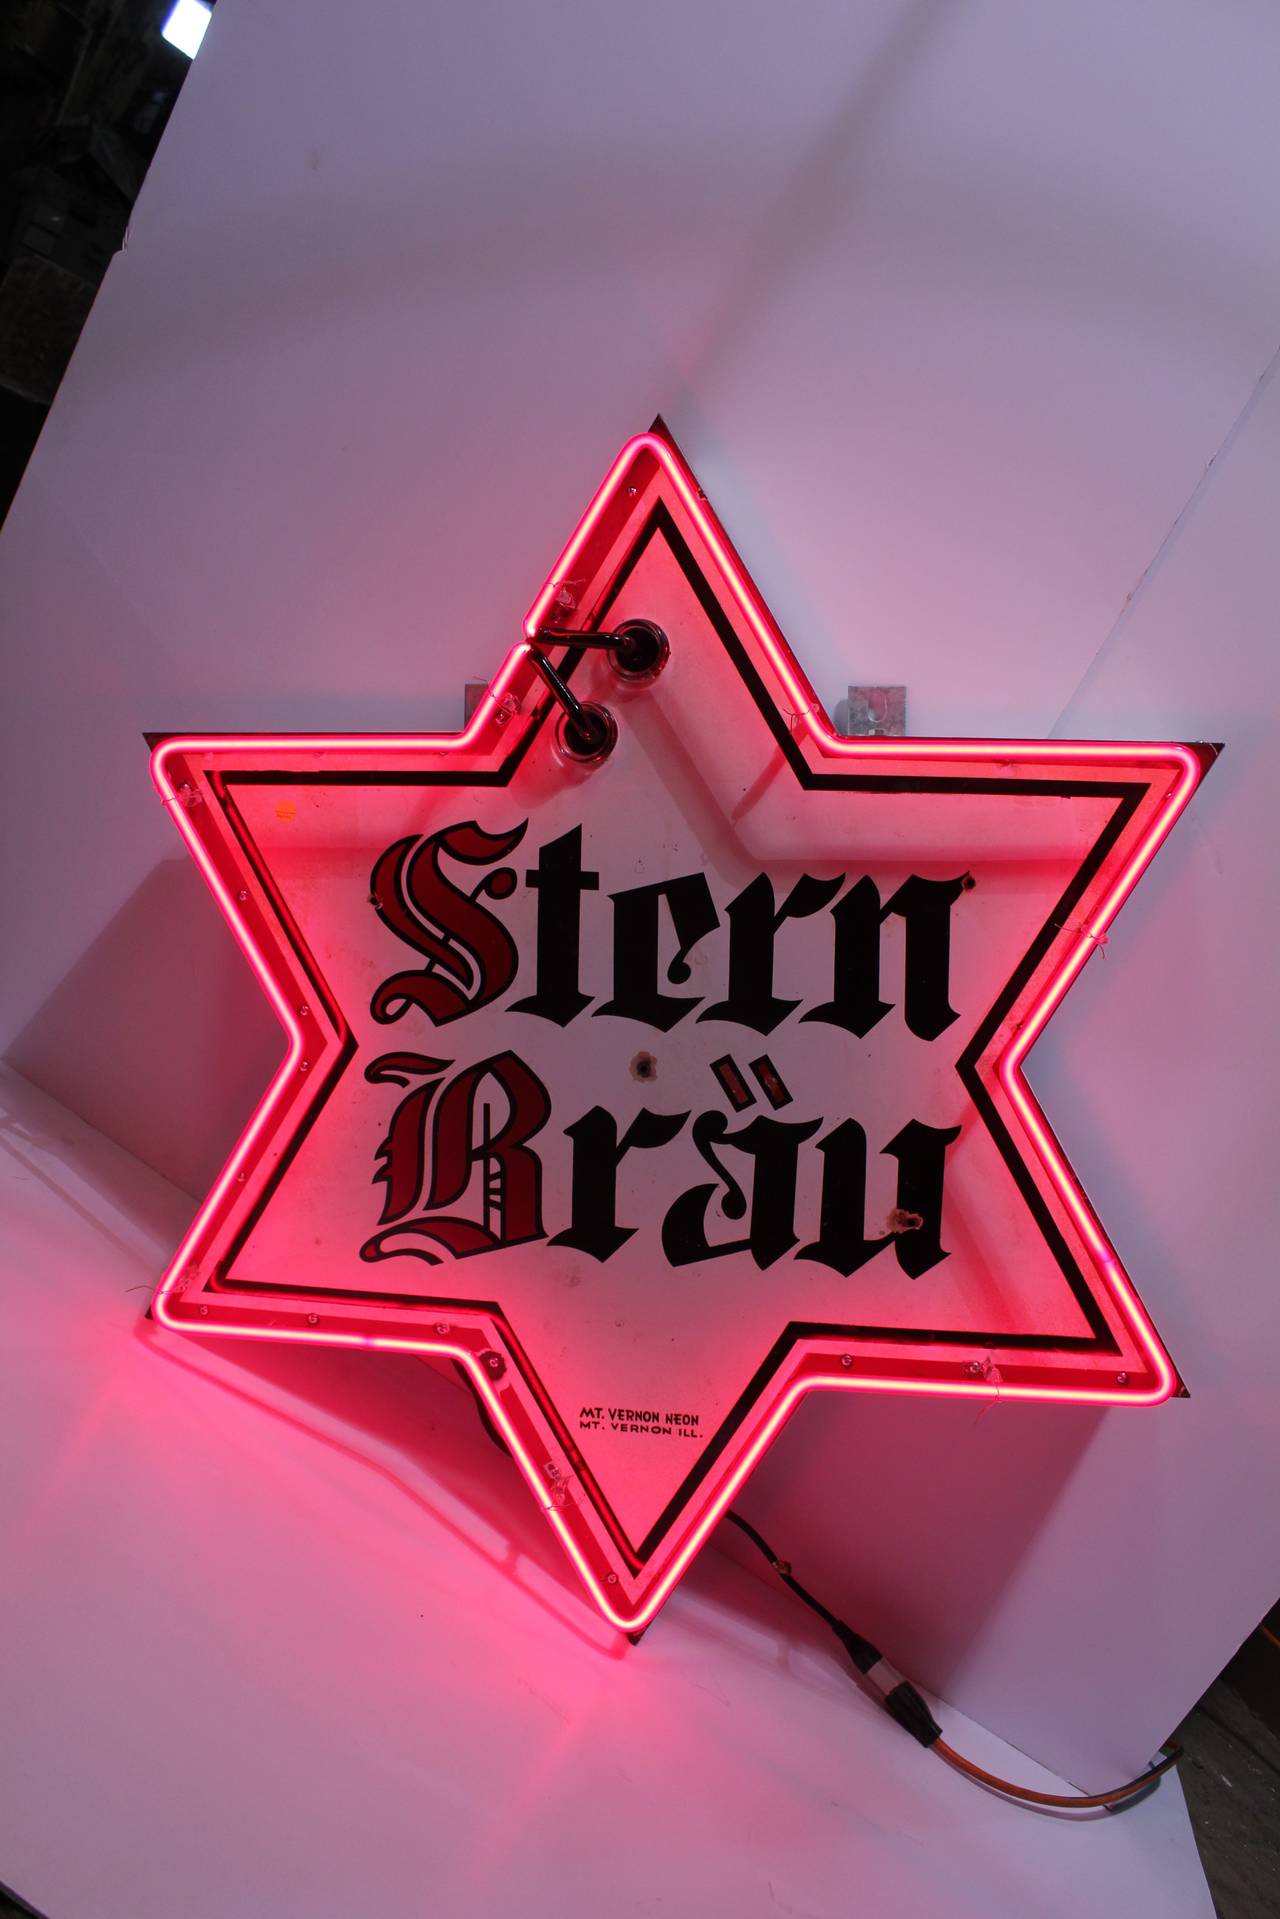 1930s porcelain advertising sign for Stern Brau beer with a red neon. Newly rewired.